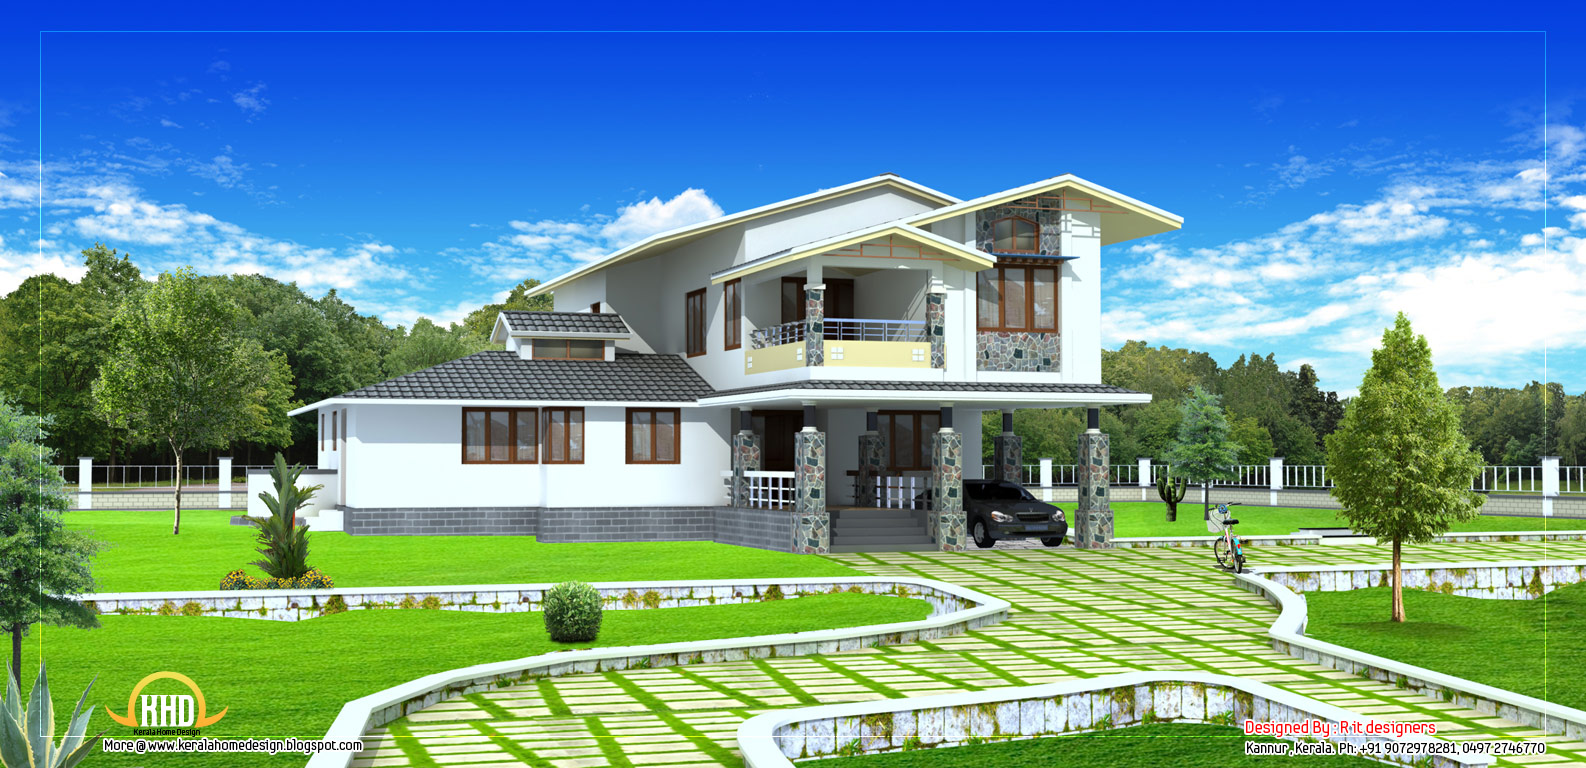  2  Story  house  plan  2490 Sq Ft Kerala  home  design and 